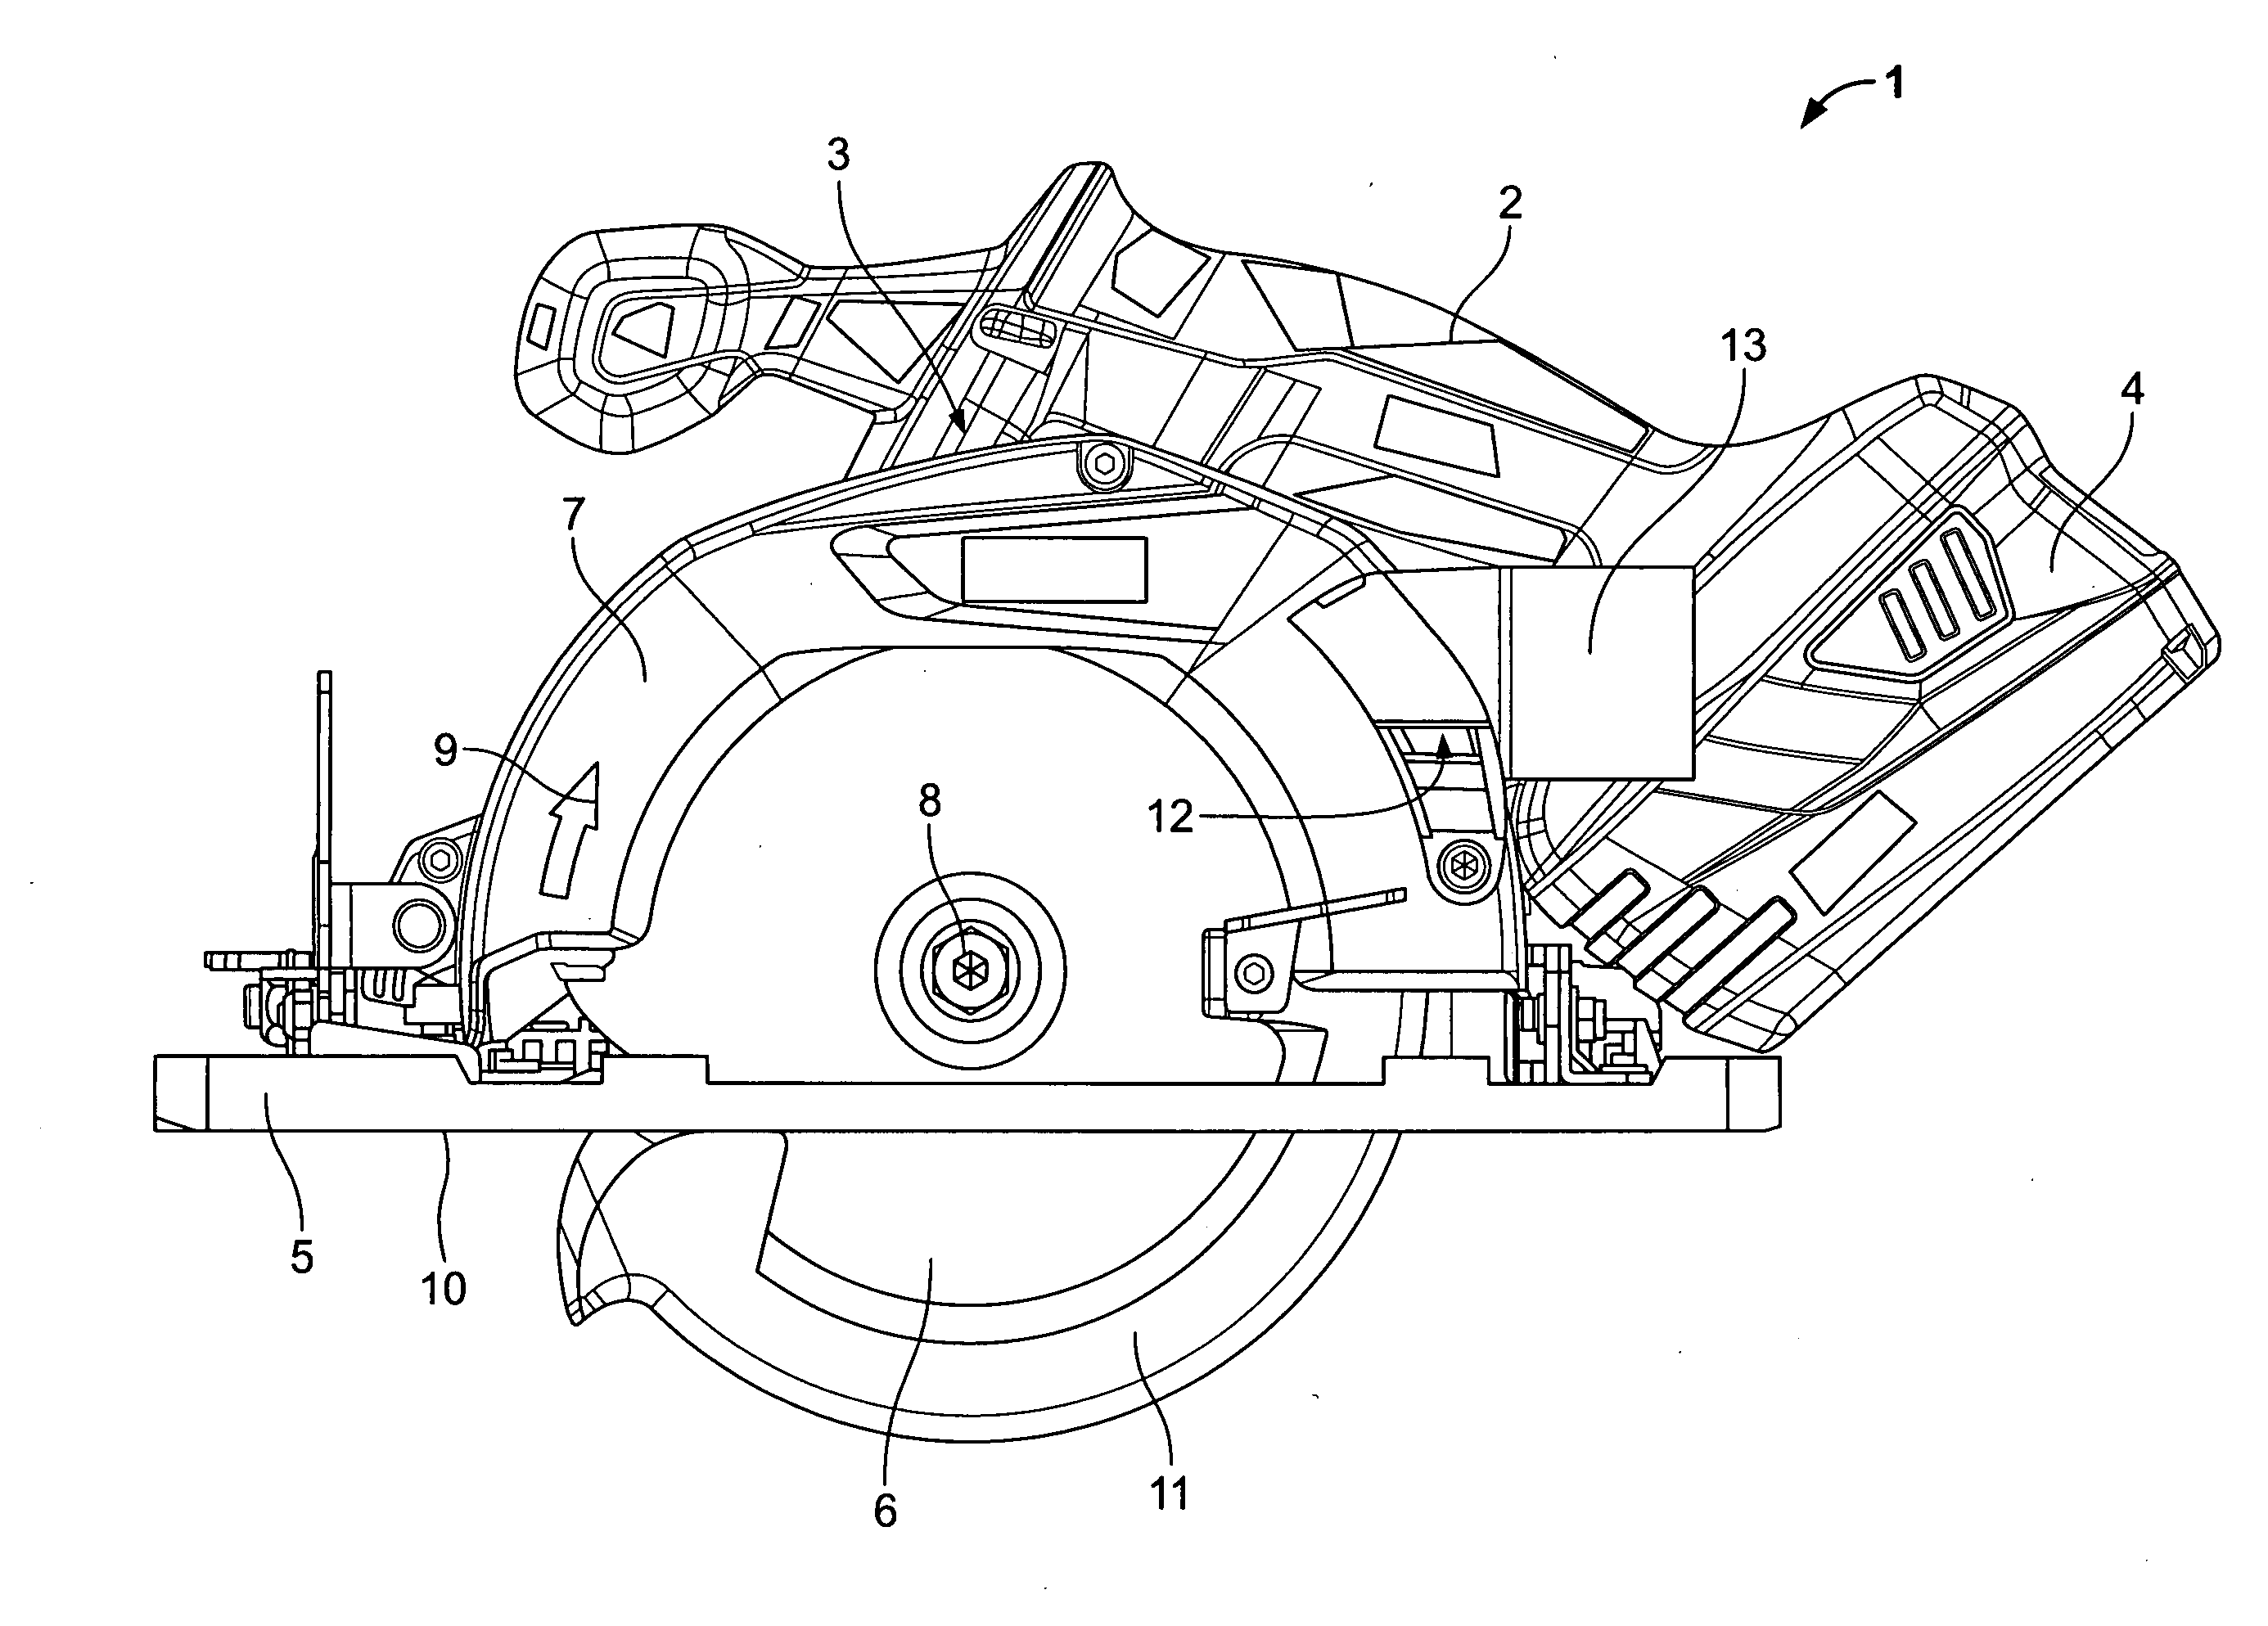 Hand-held electric power tool with a suction adapter